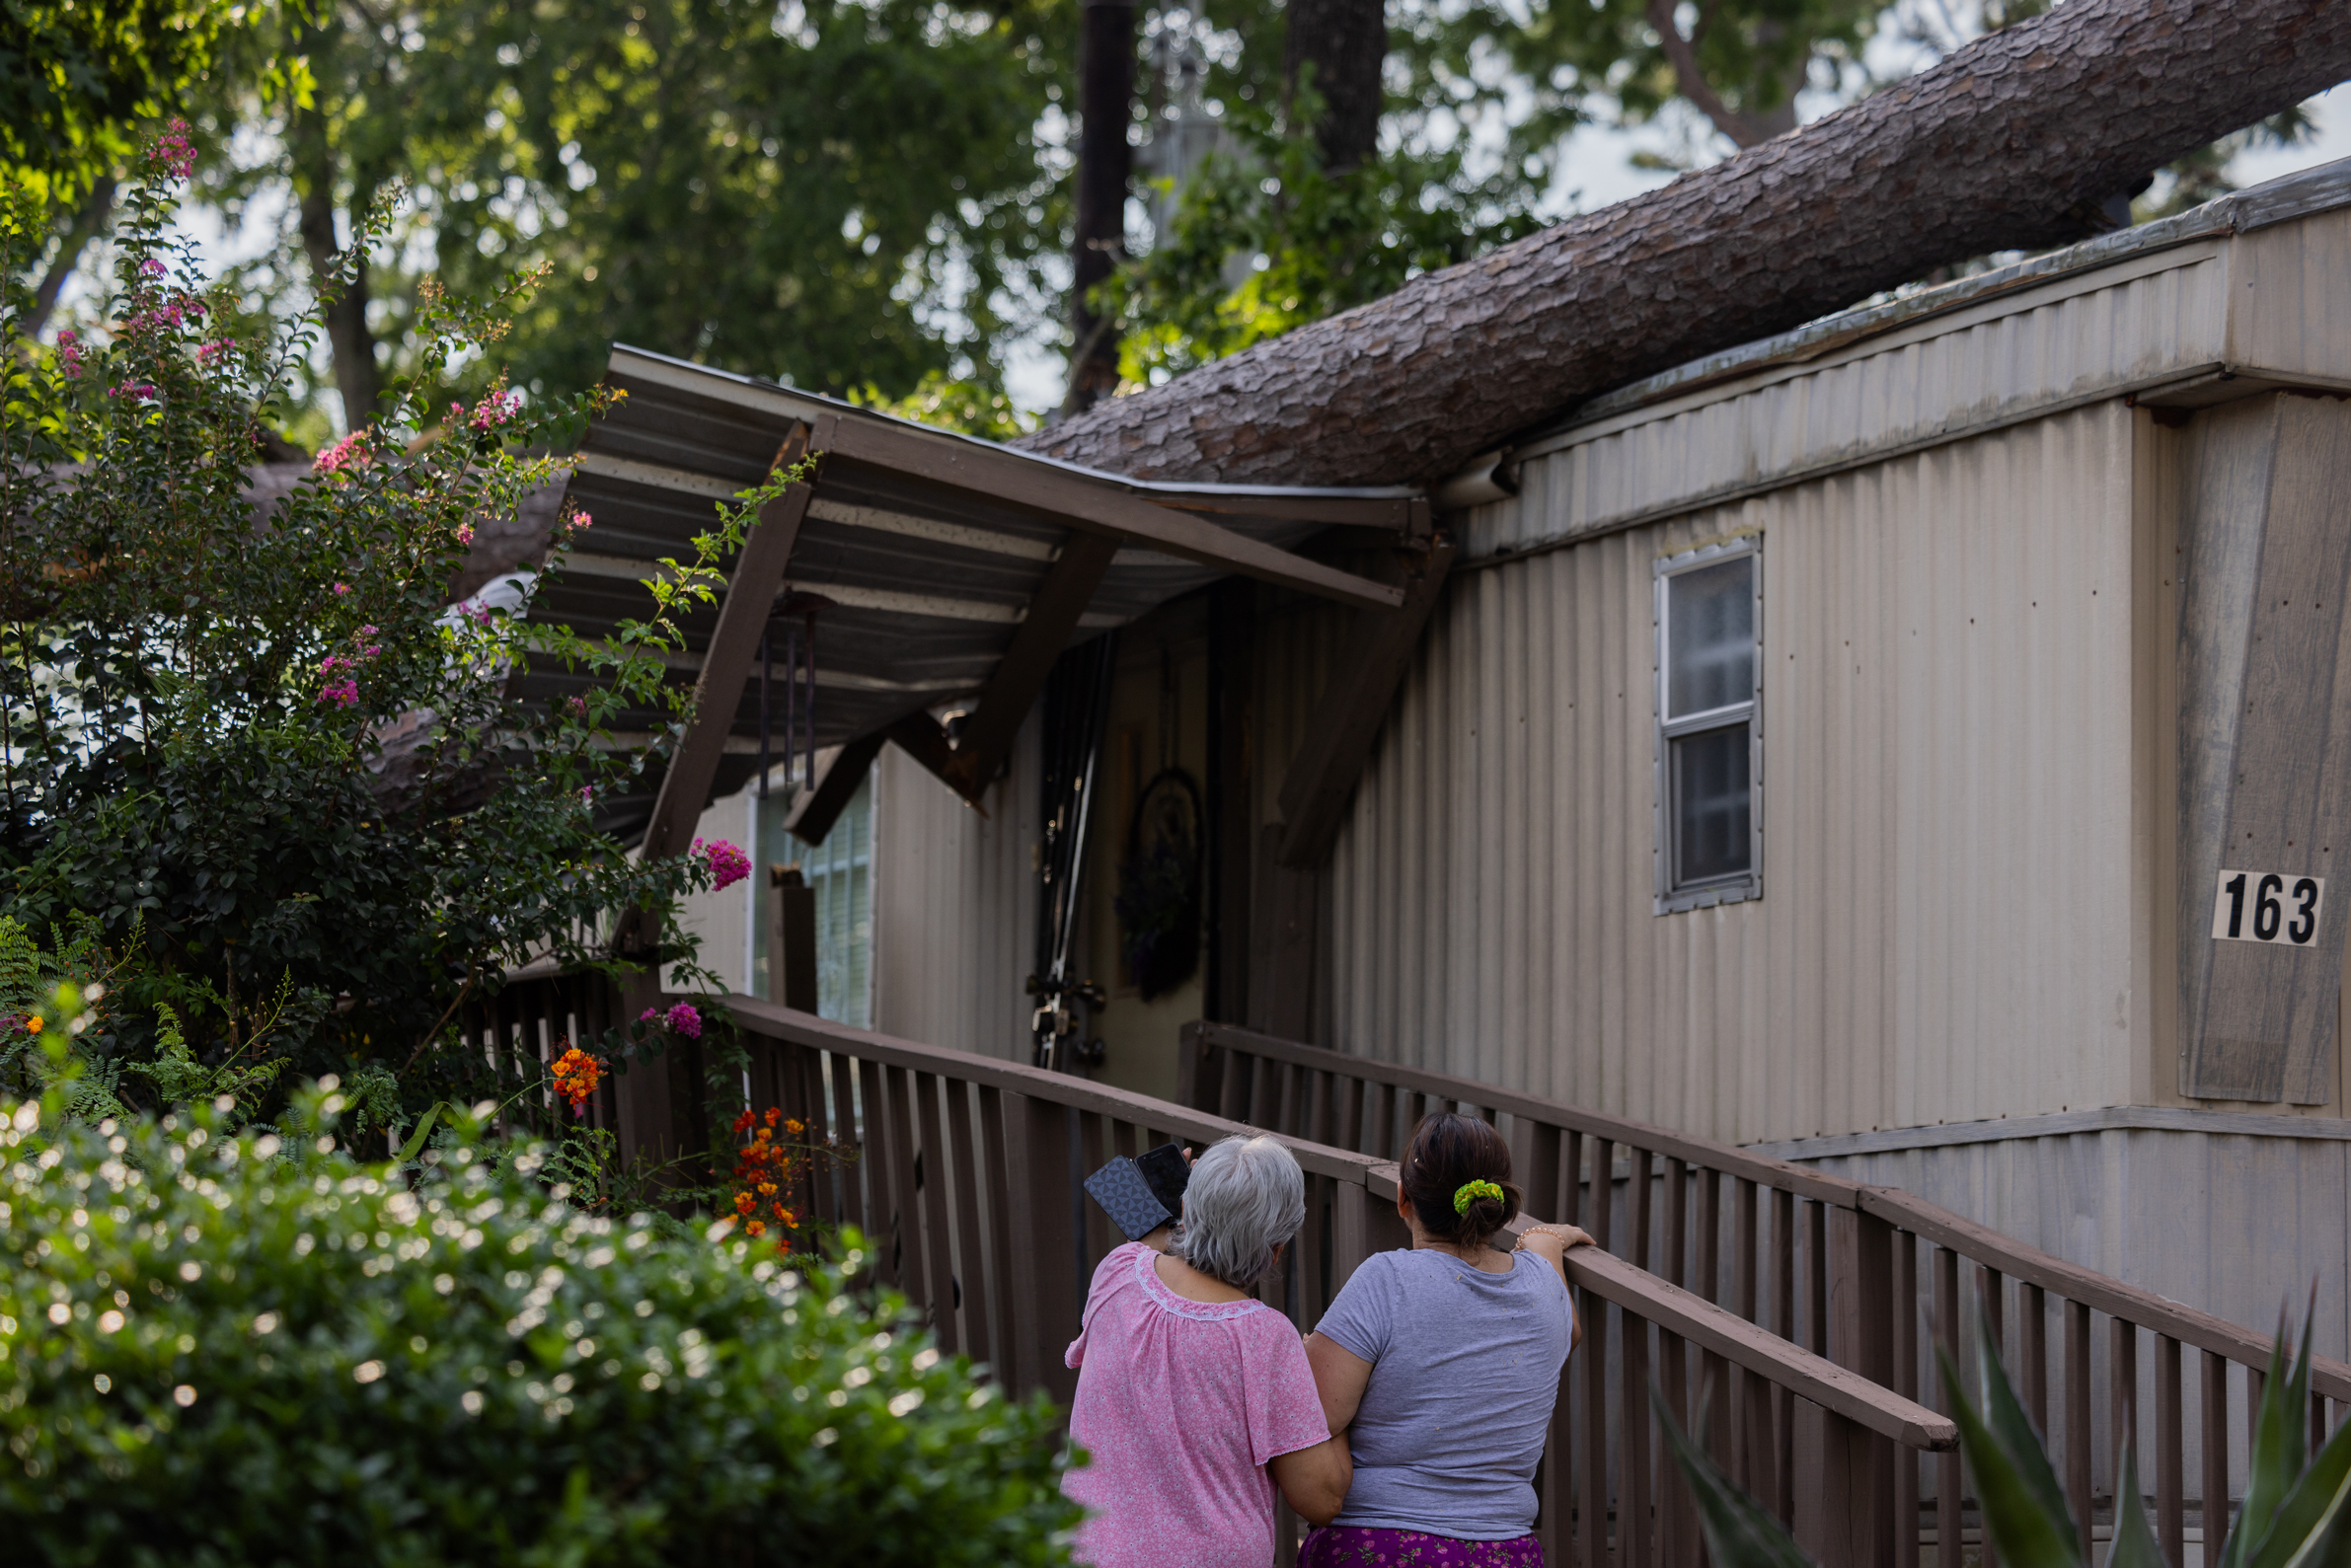 Two people observe the damage to a mobile home from a fallen tree in Greenspoint after an overnight storm moved through the area